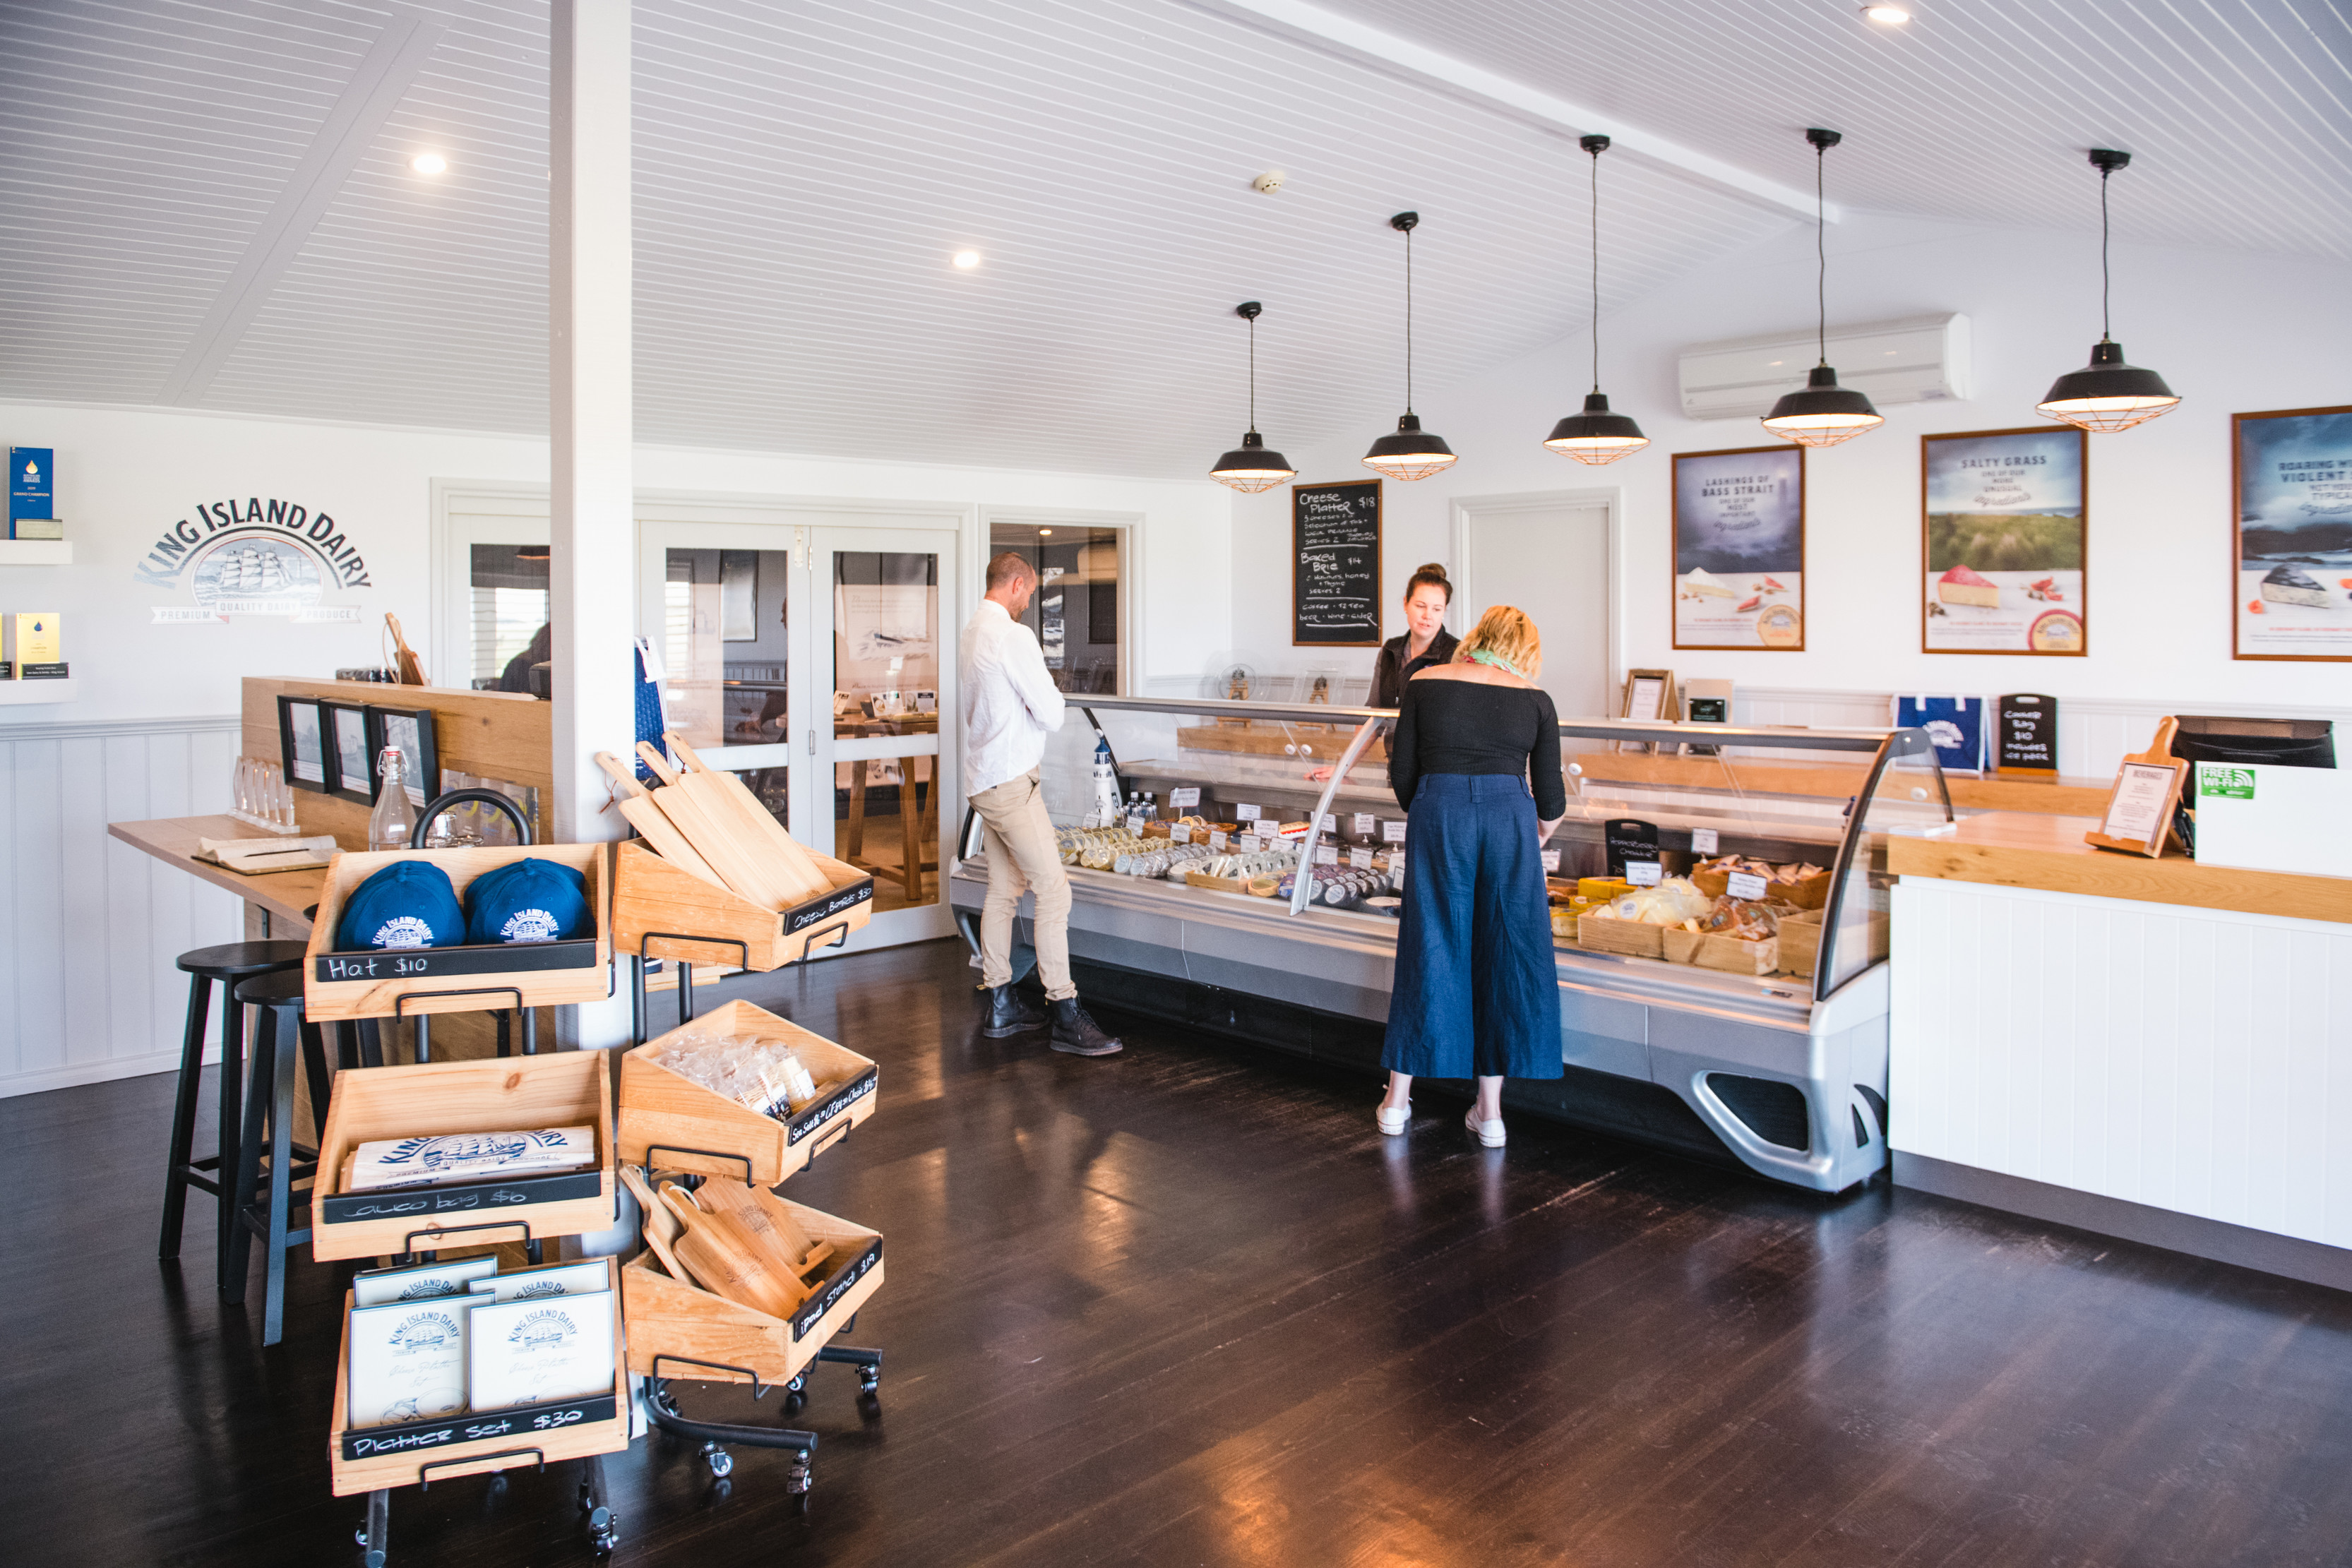 Image of inside the King Island Dairy. Two customers are looking at a large variety of cheeses in the display.